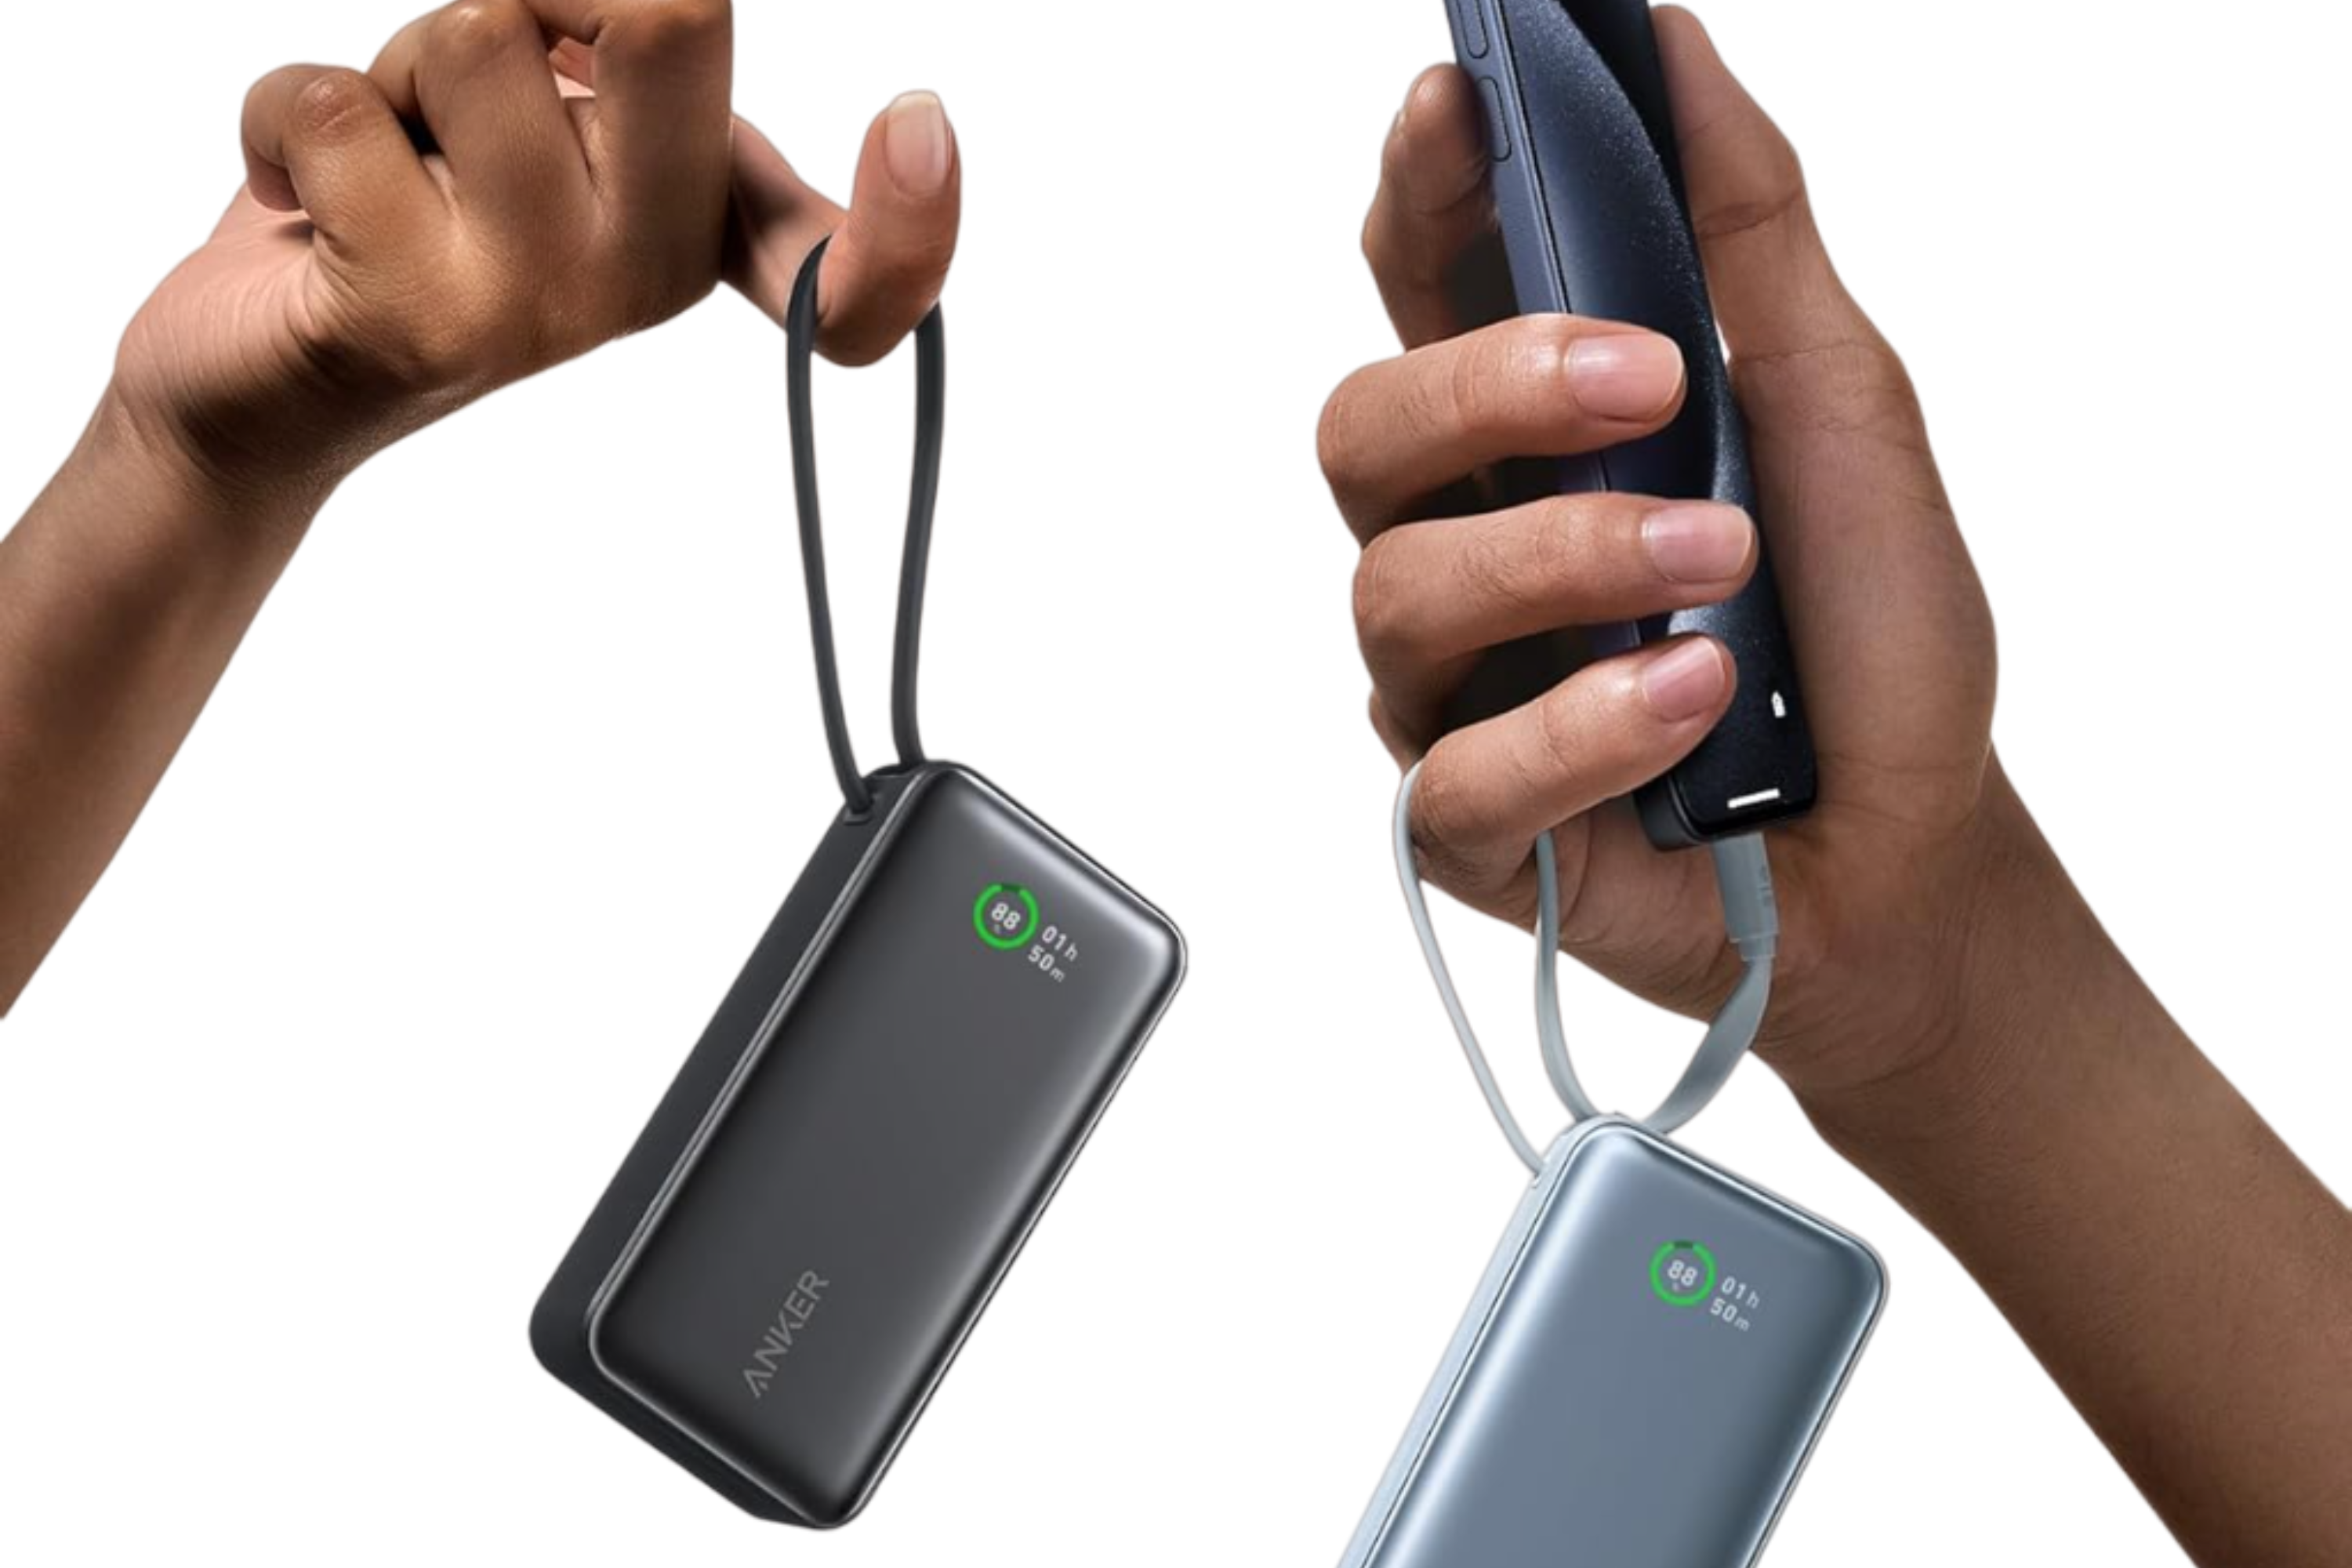 Anker Nano Power Bank, 10,000mAh Portable Charger in hands